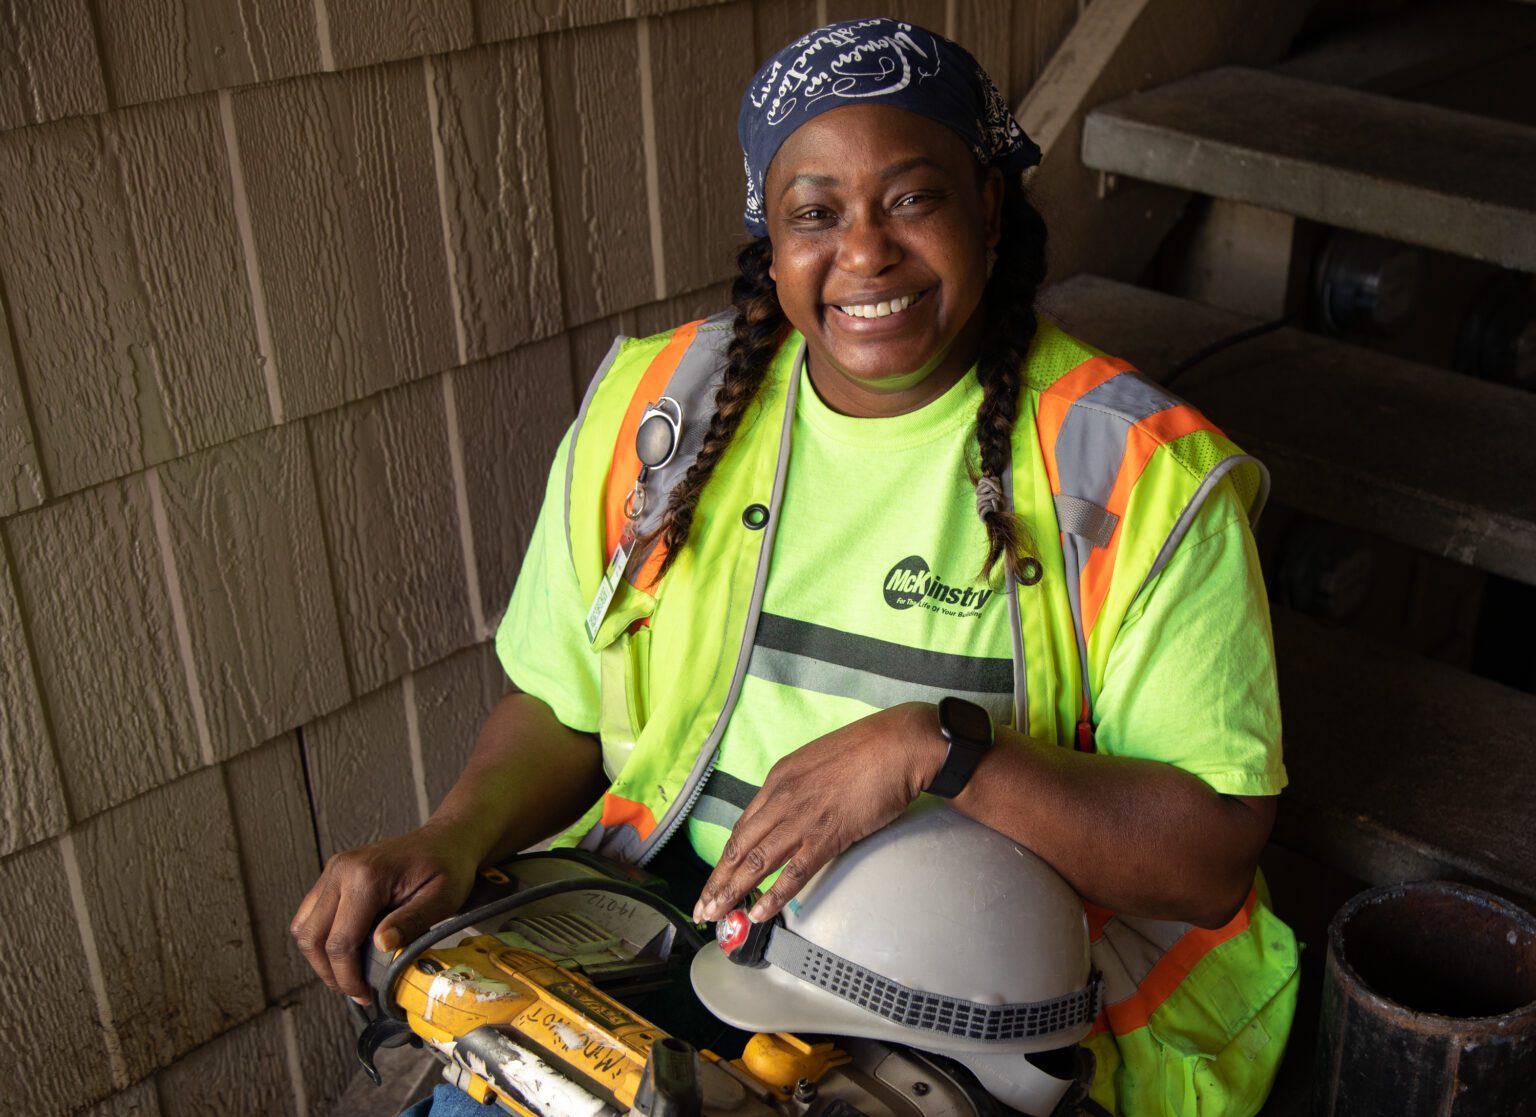 Curtistine Billups wearing a safety vest and holding her tools and helmet.